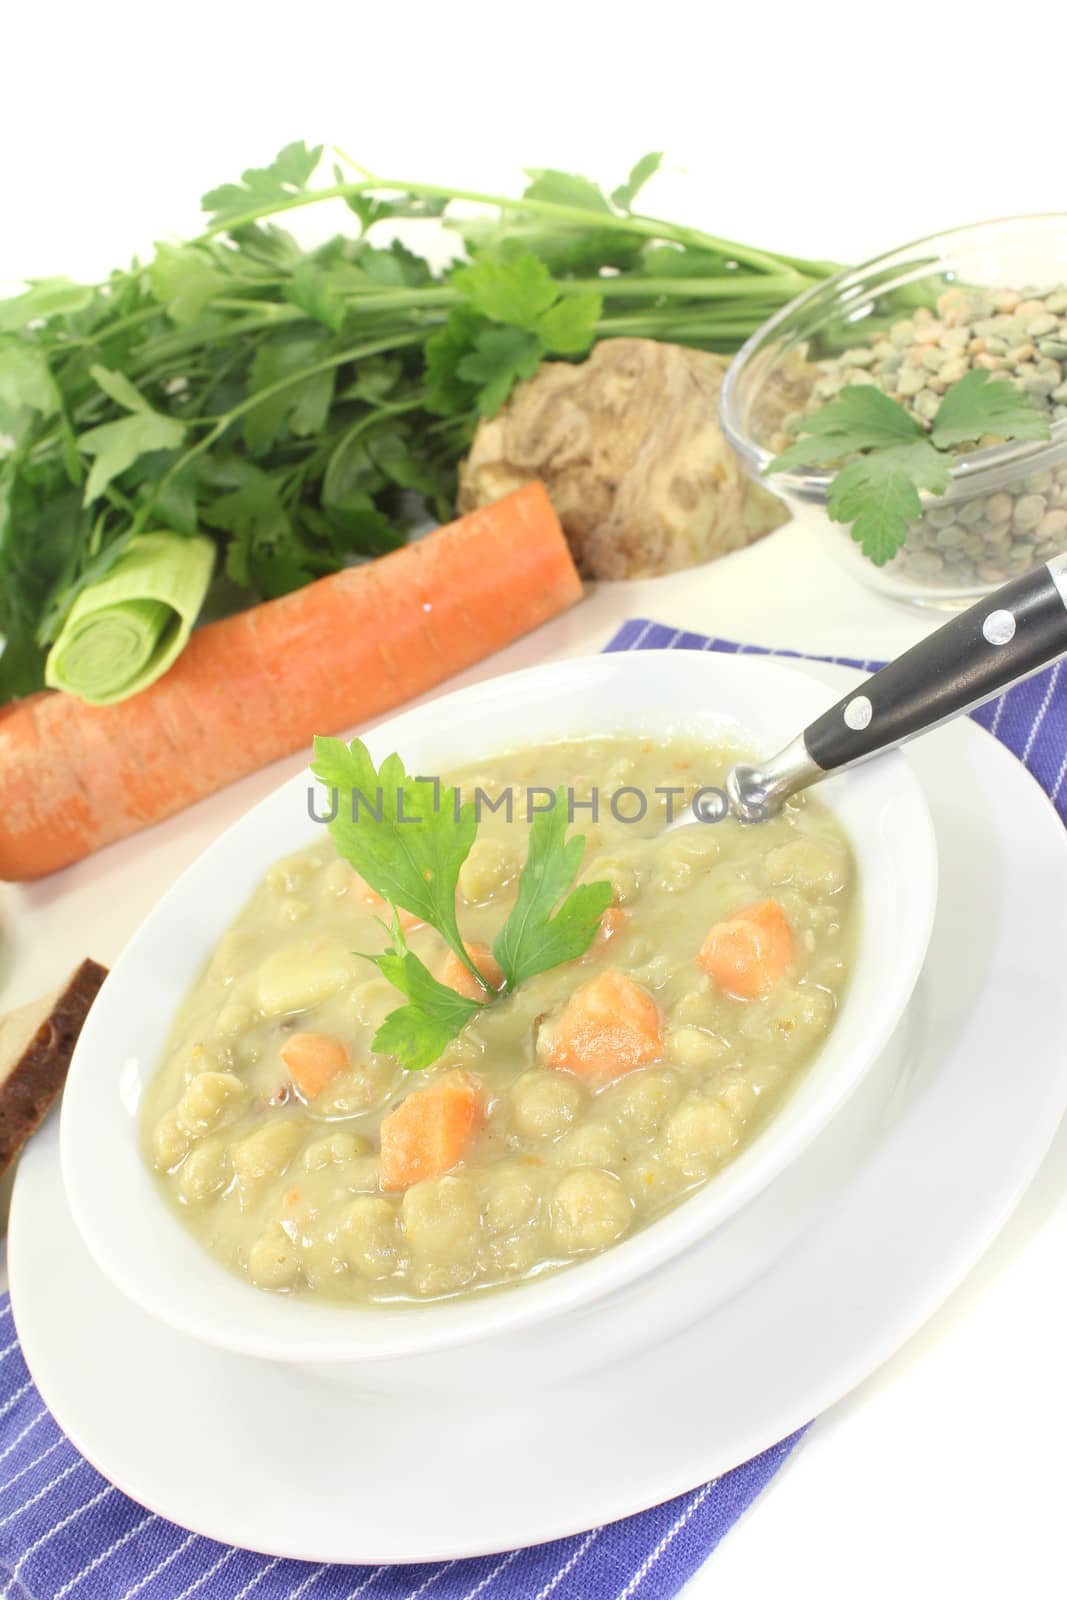 Pea soup with bread by discovery